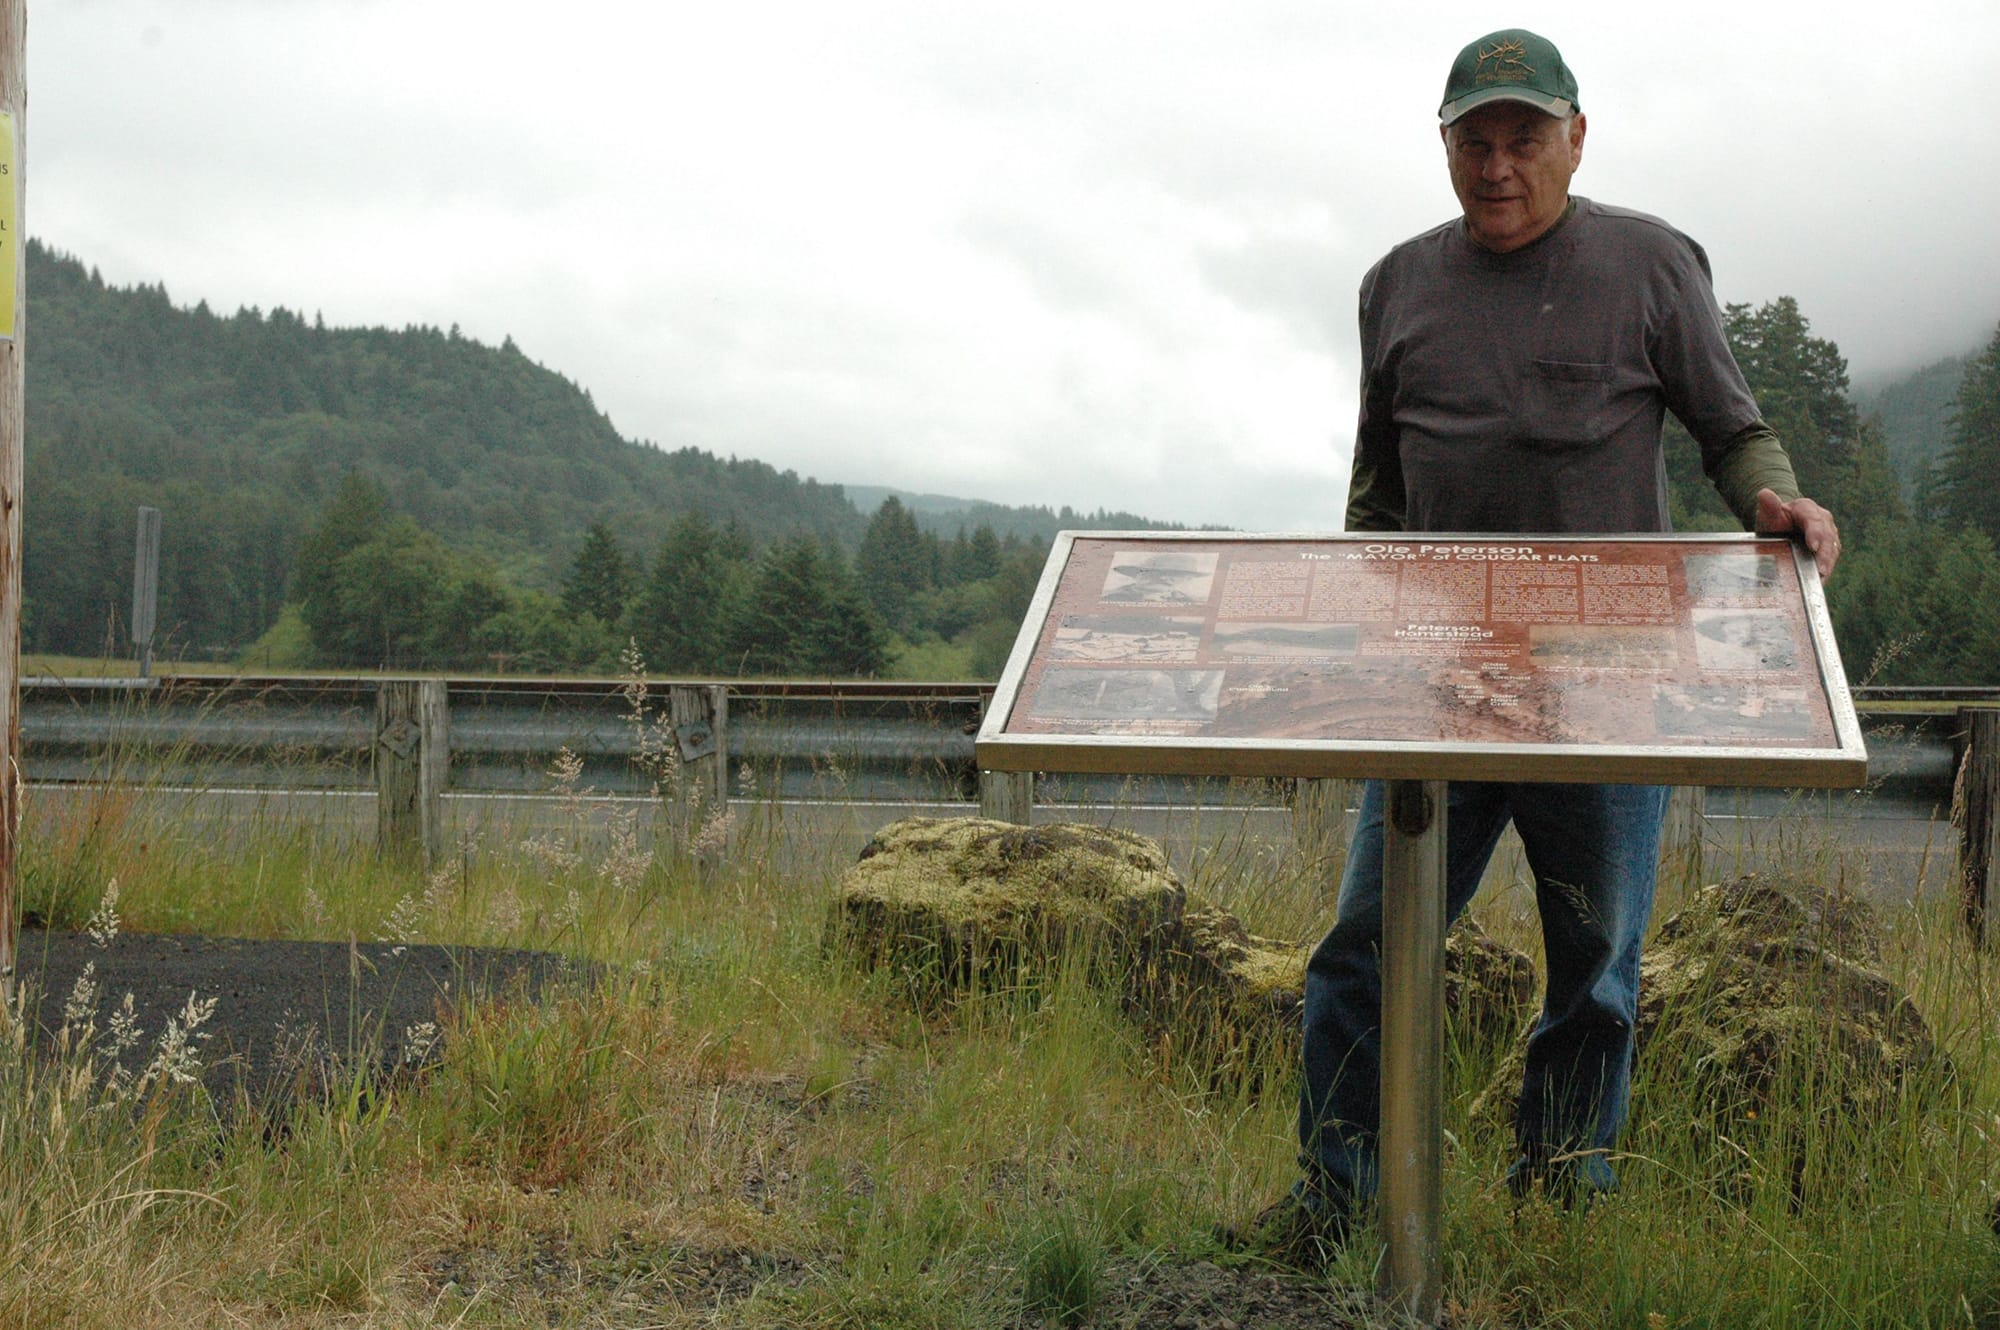 Amateur historian Gene Ritter of Vancouver stands with a newly placed historical marker along Lewis River Road at the Swift Power Canal in Skamania County.